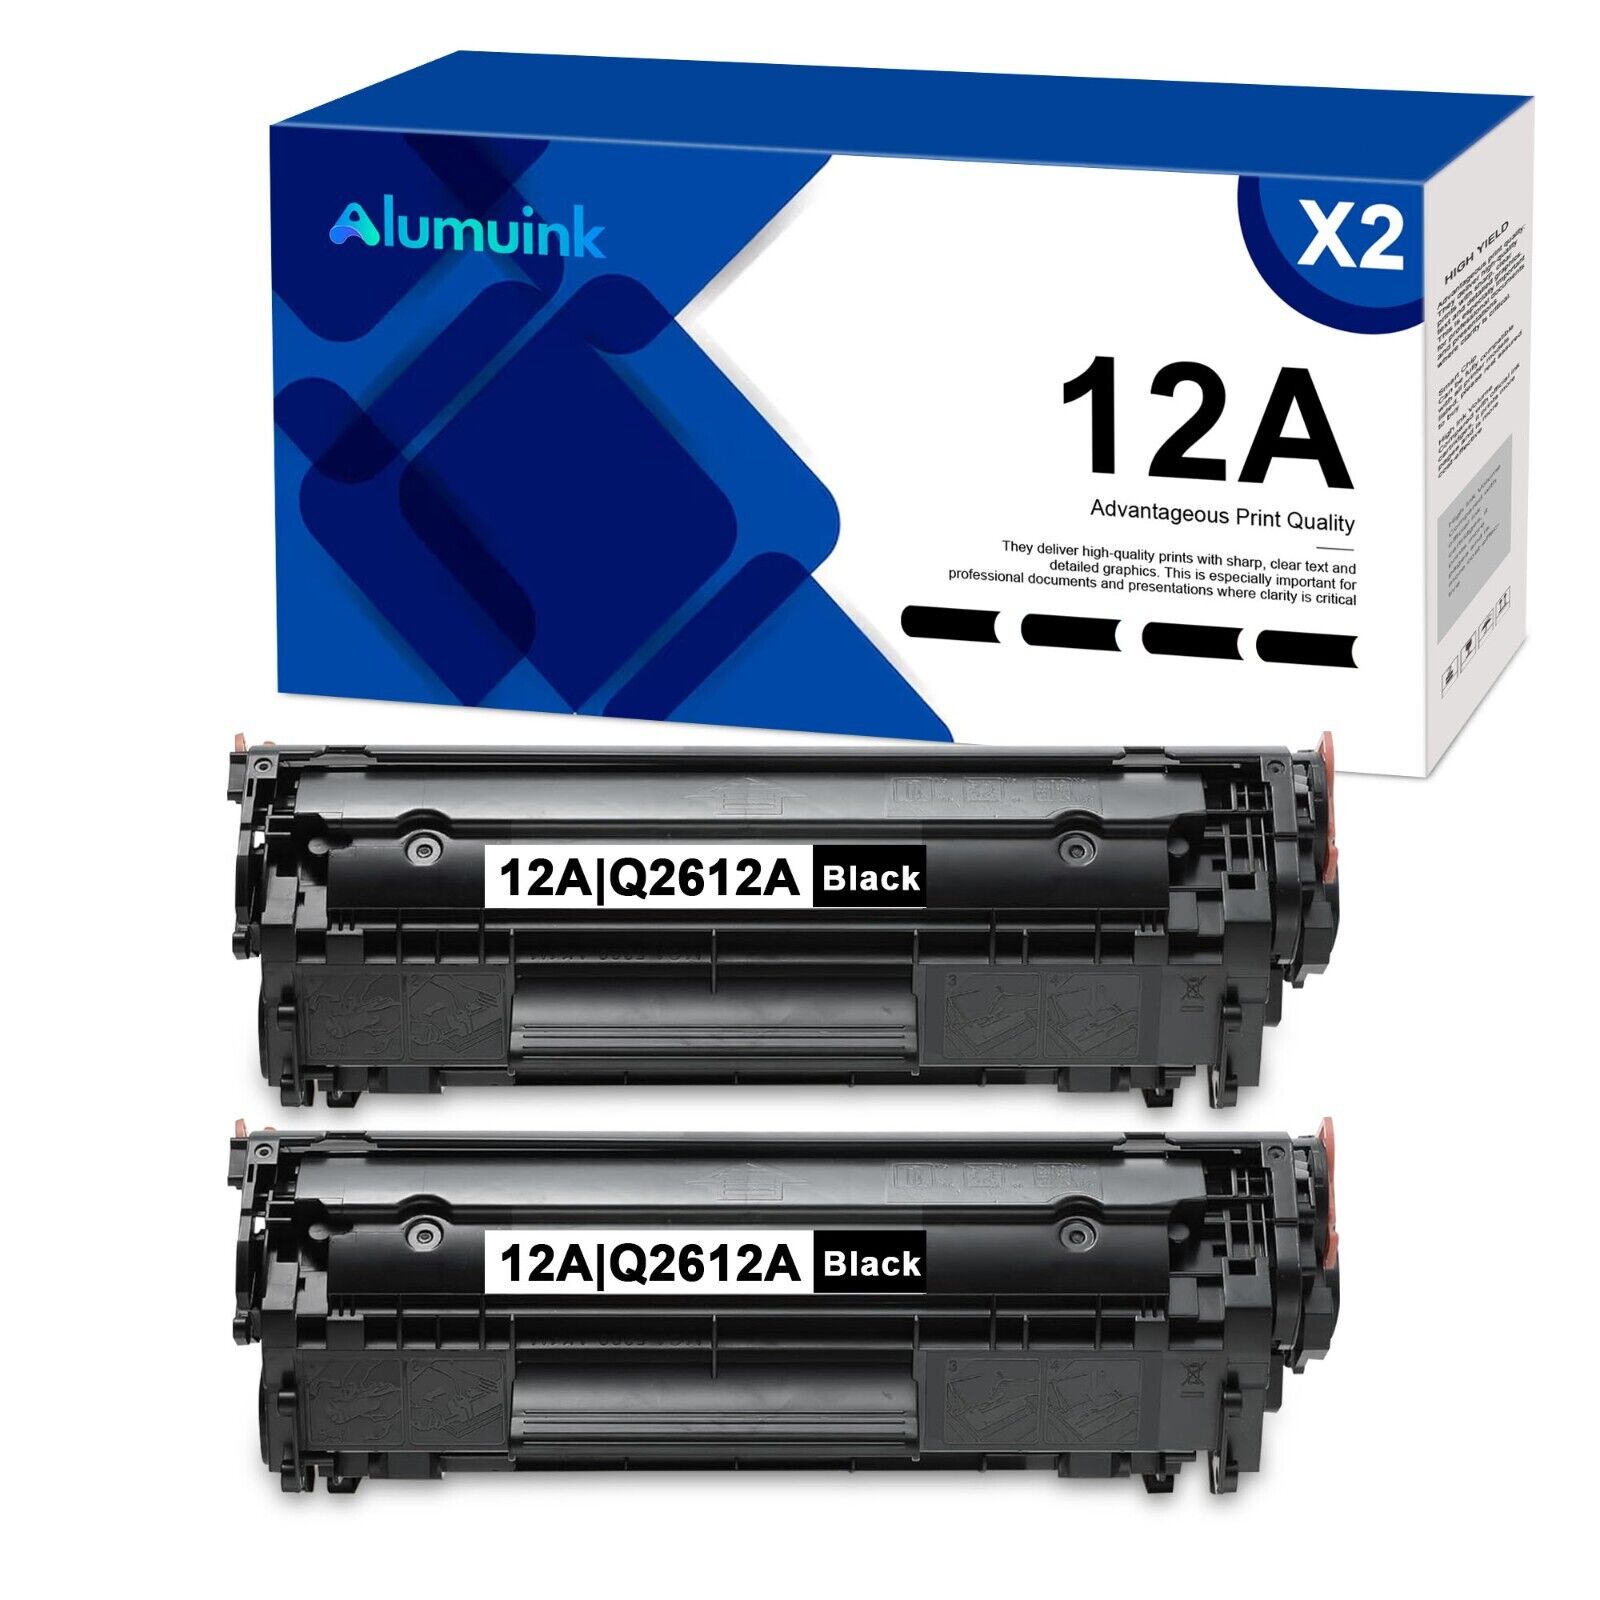 12A Toner Replacement for HP 12A Q2612A 1020 1022 1012 1010 (2-Pack，Black)